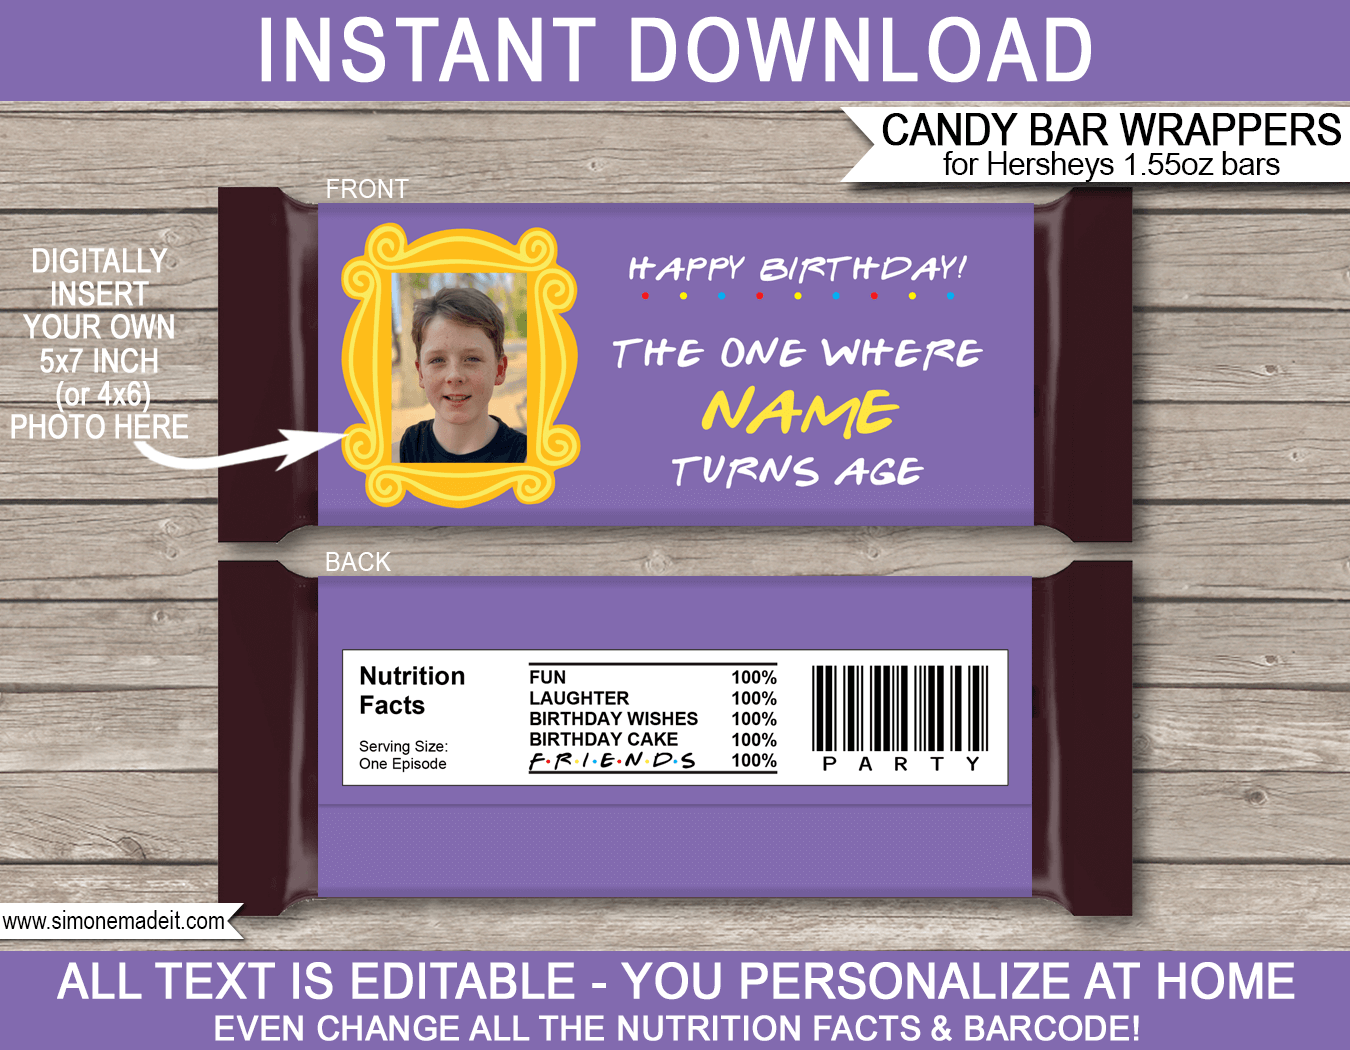 Printable Friends Theme Birthday Candy Bar Wrappers | The One Where has a Birthday Episode | Printable Hershey Chocolate Bar Labels | Friends TV Series | Personalized Candy Bars | Birthday Party Favors | Editable Template | INSTANT DOWNLOAD via simonemadeit.com